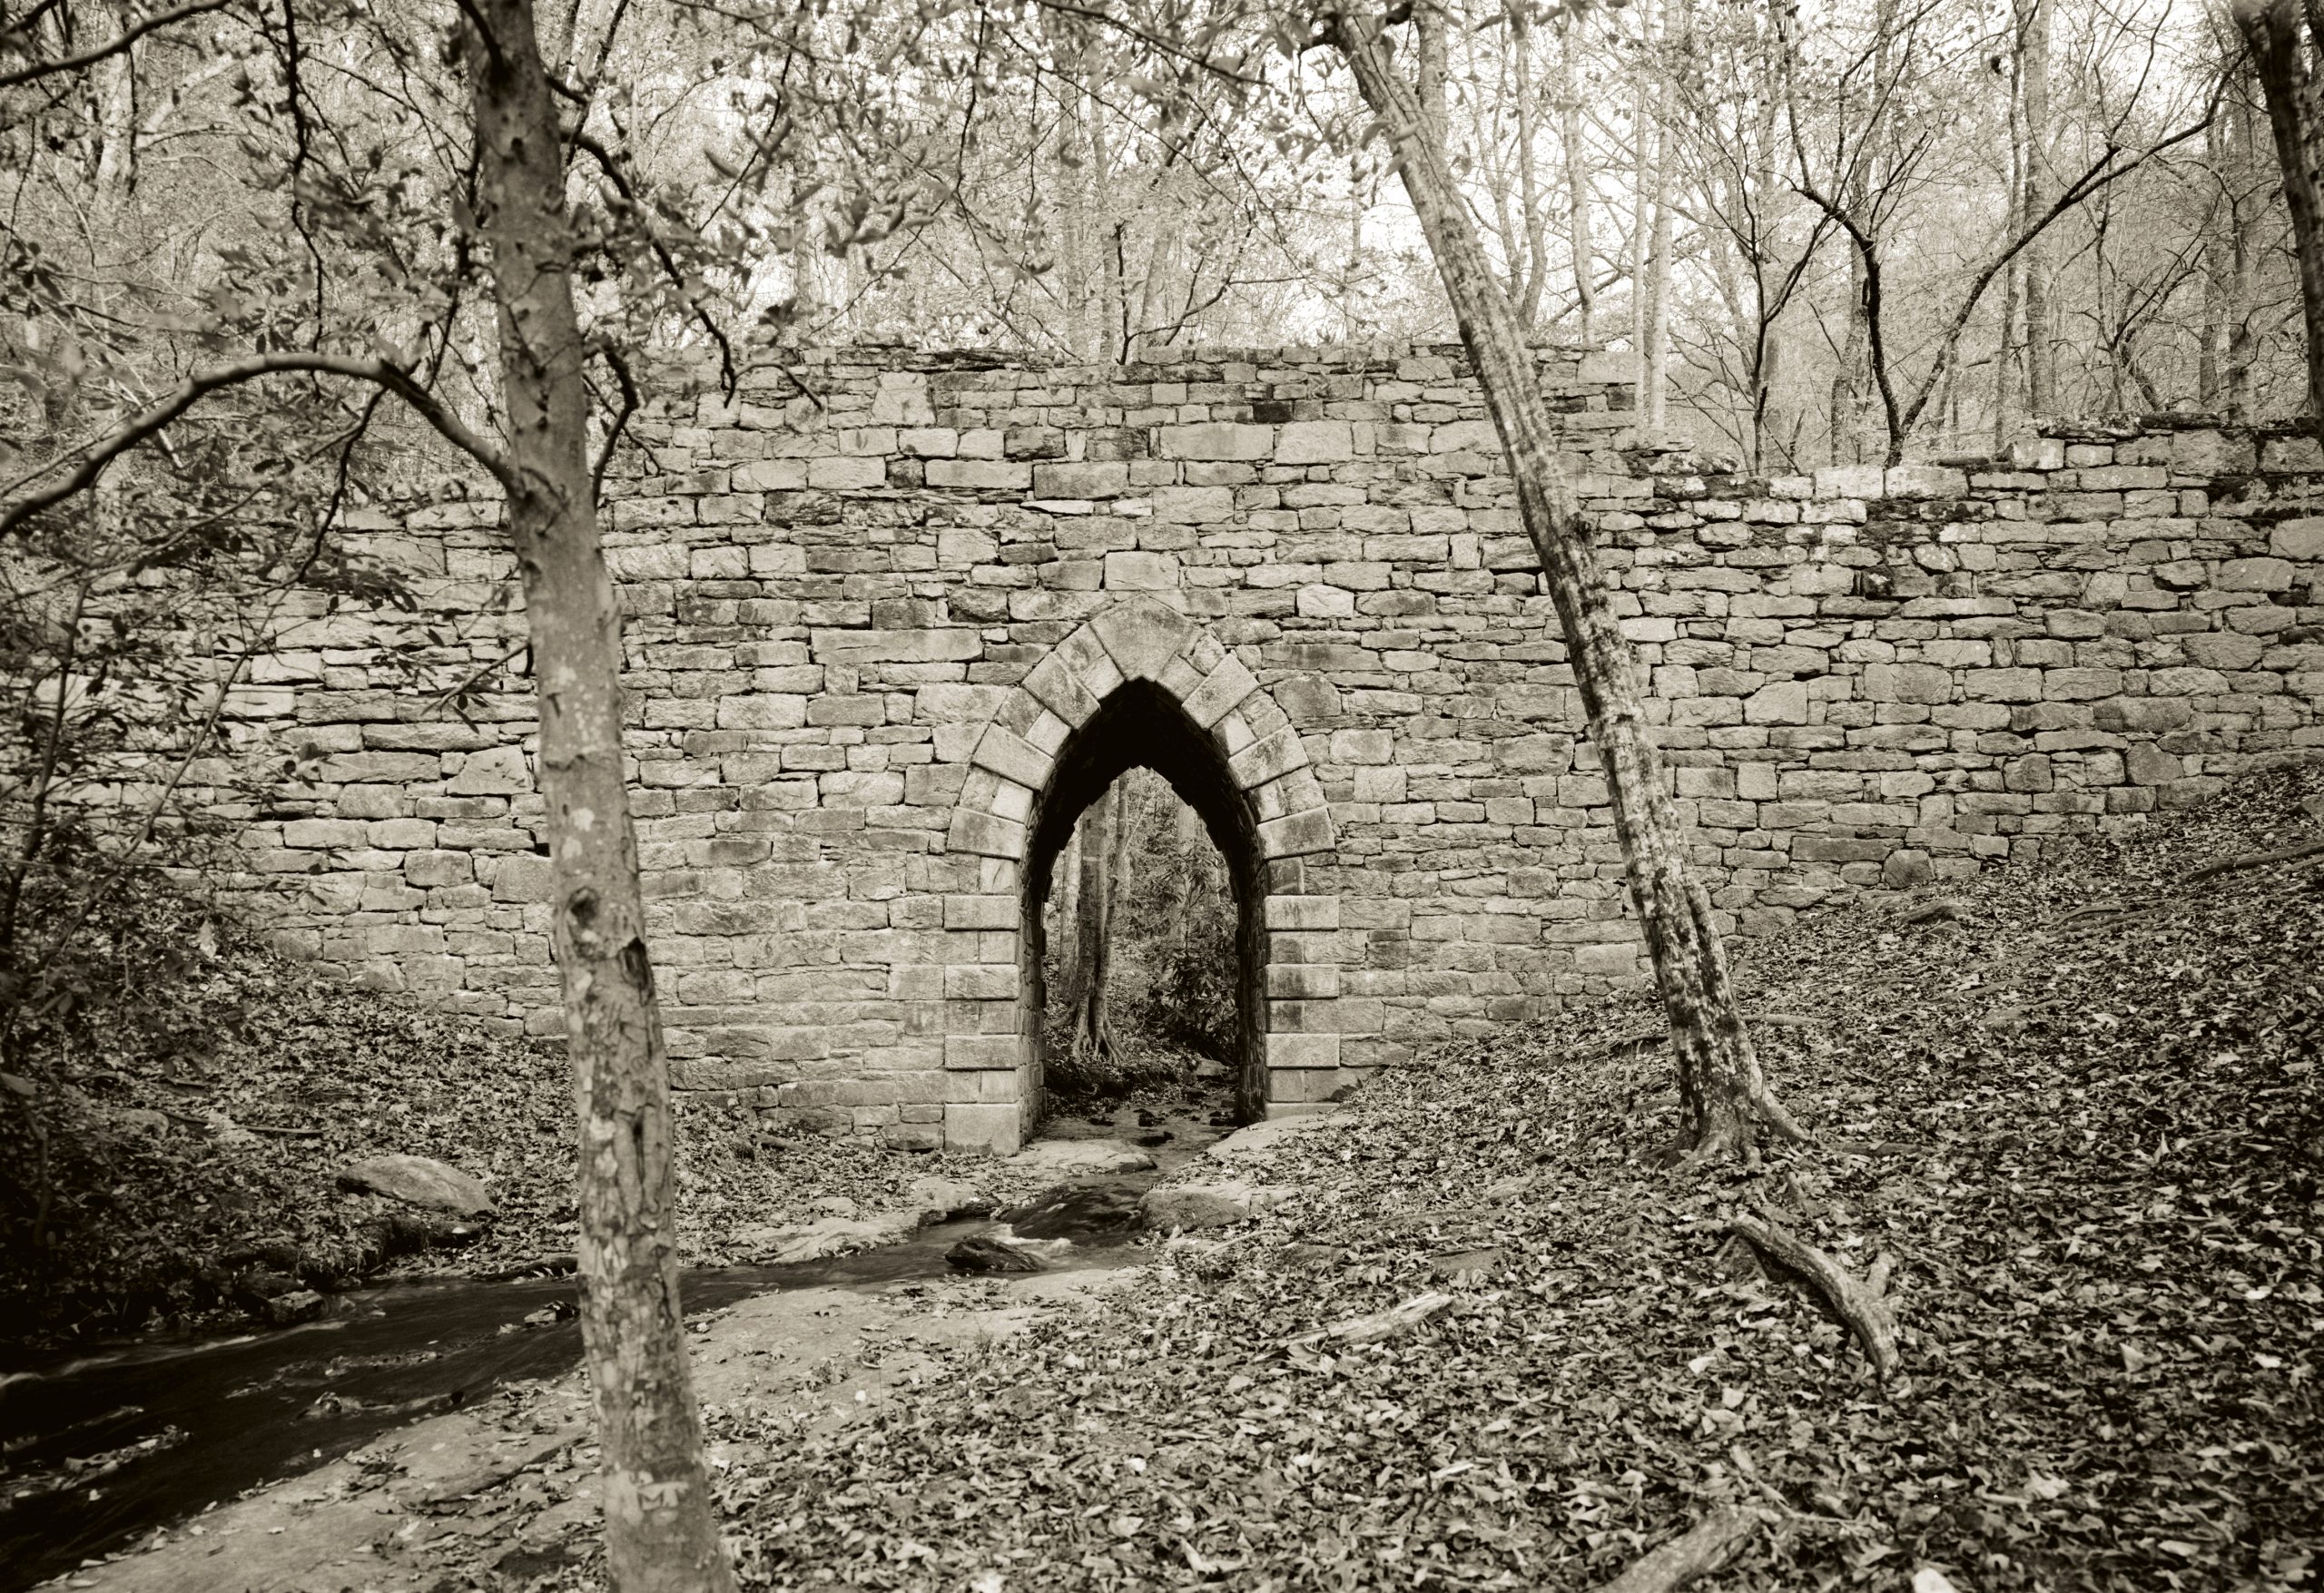 The Gothic arch of Poinsett Bridge, designed by Robert Mills and named for prominent South Carolinian Joel Roberts Poinsett, still stands where the original State Road used to run. It is the oldest surviving bridge in the Southeast.